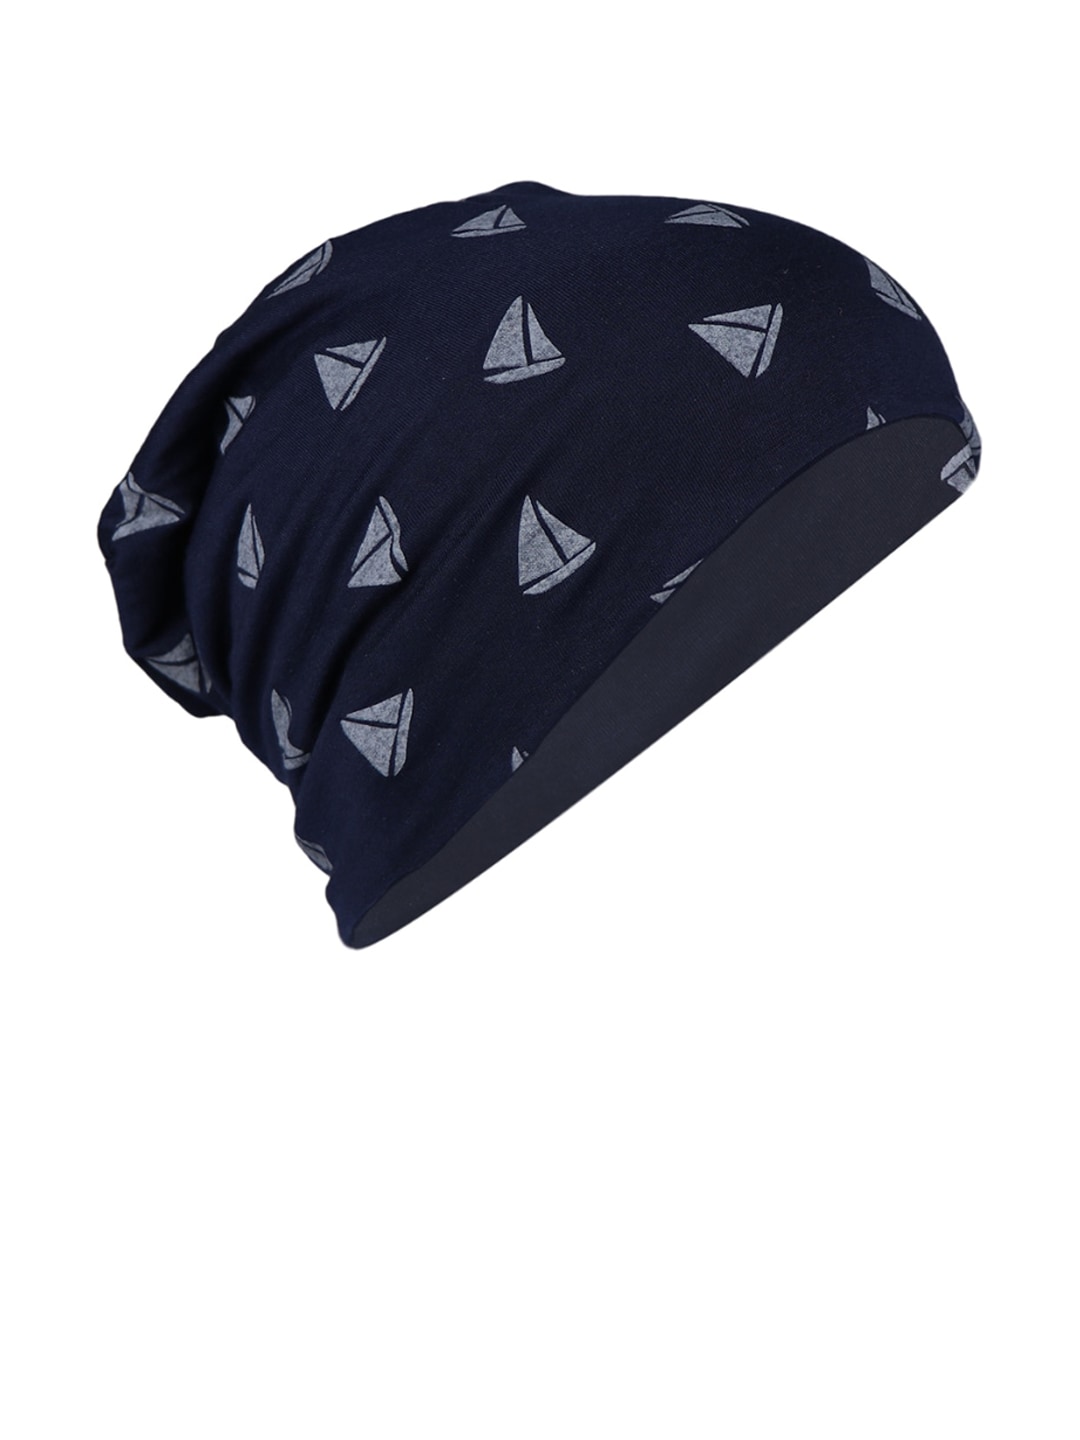 iSWEVEN Unisex Navy Blue Printed Beanie Price in India